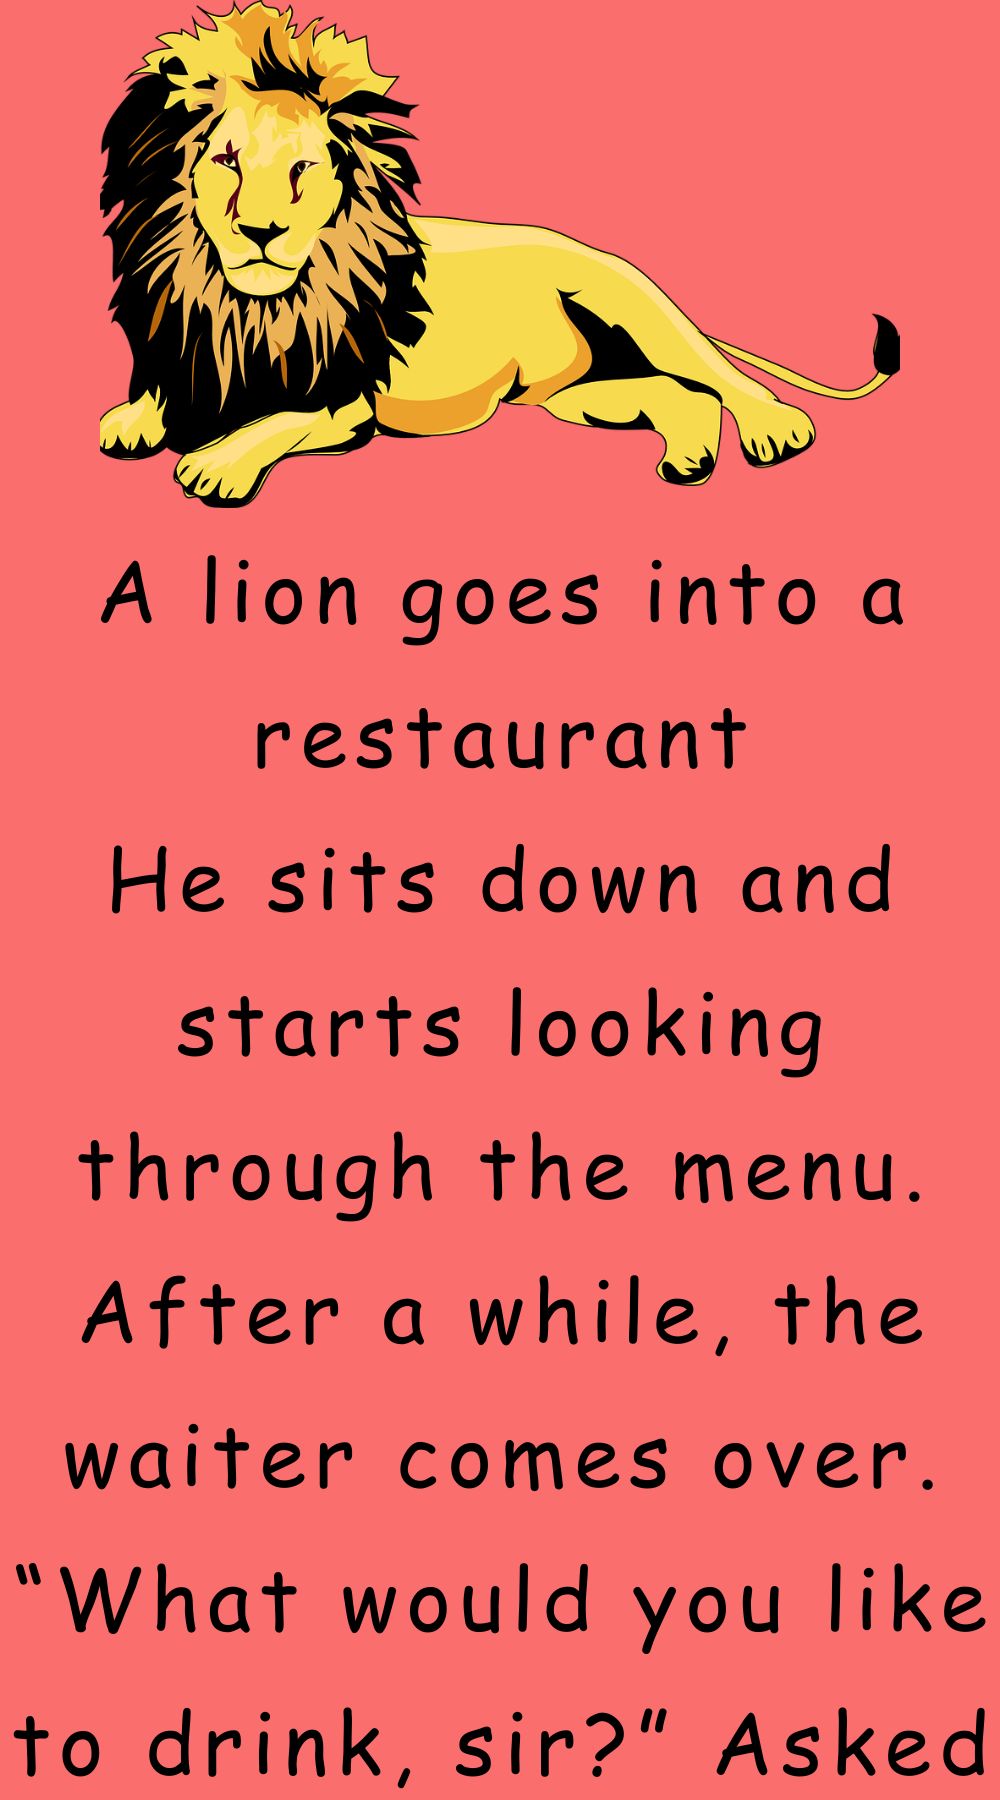 A lion goes into a restaurant